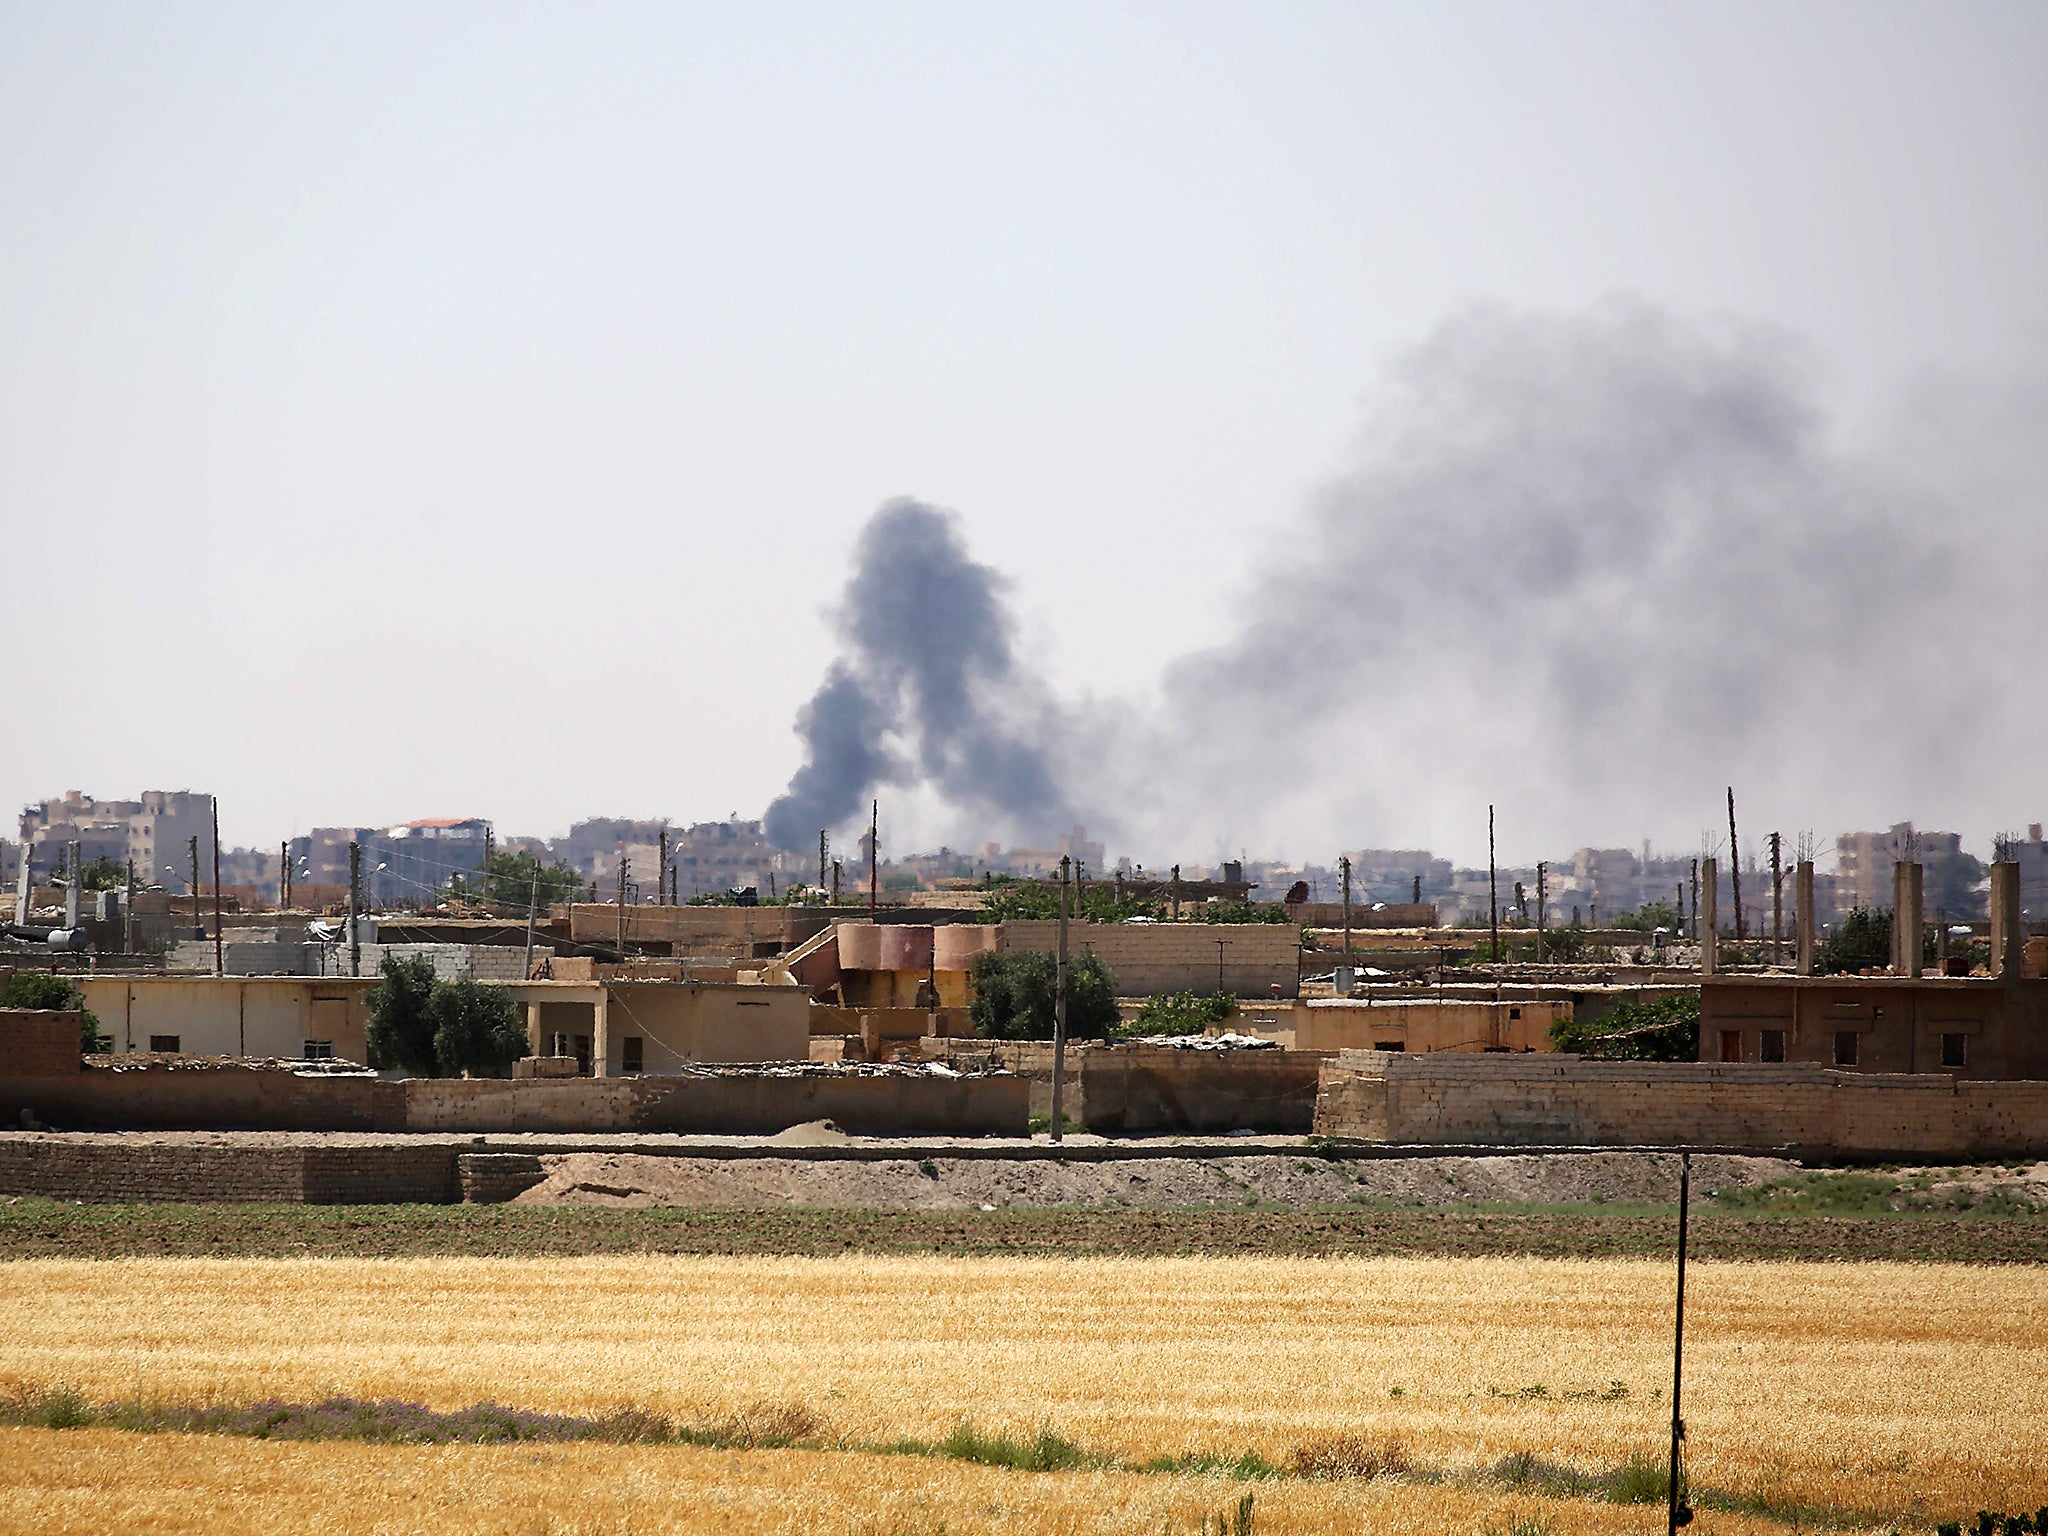 Smoke rises from buildings in the al-Meshleb neighbourhood of Raqa as the Syrian Democratic Forces (SDF), made up of an alliance of Kurdish and Arab fighters, try to advance further into the Islamic State (IS) group's Syrian bastion